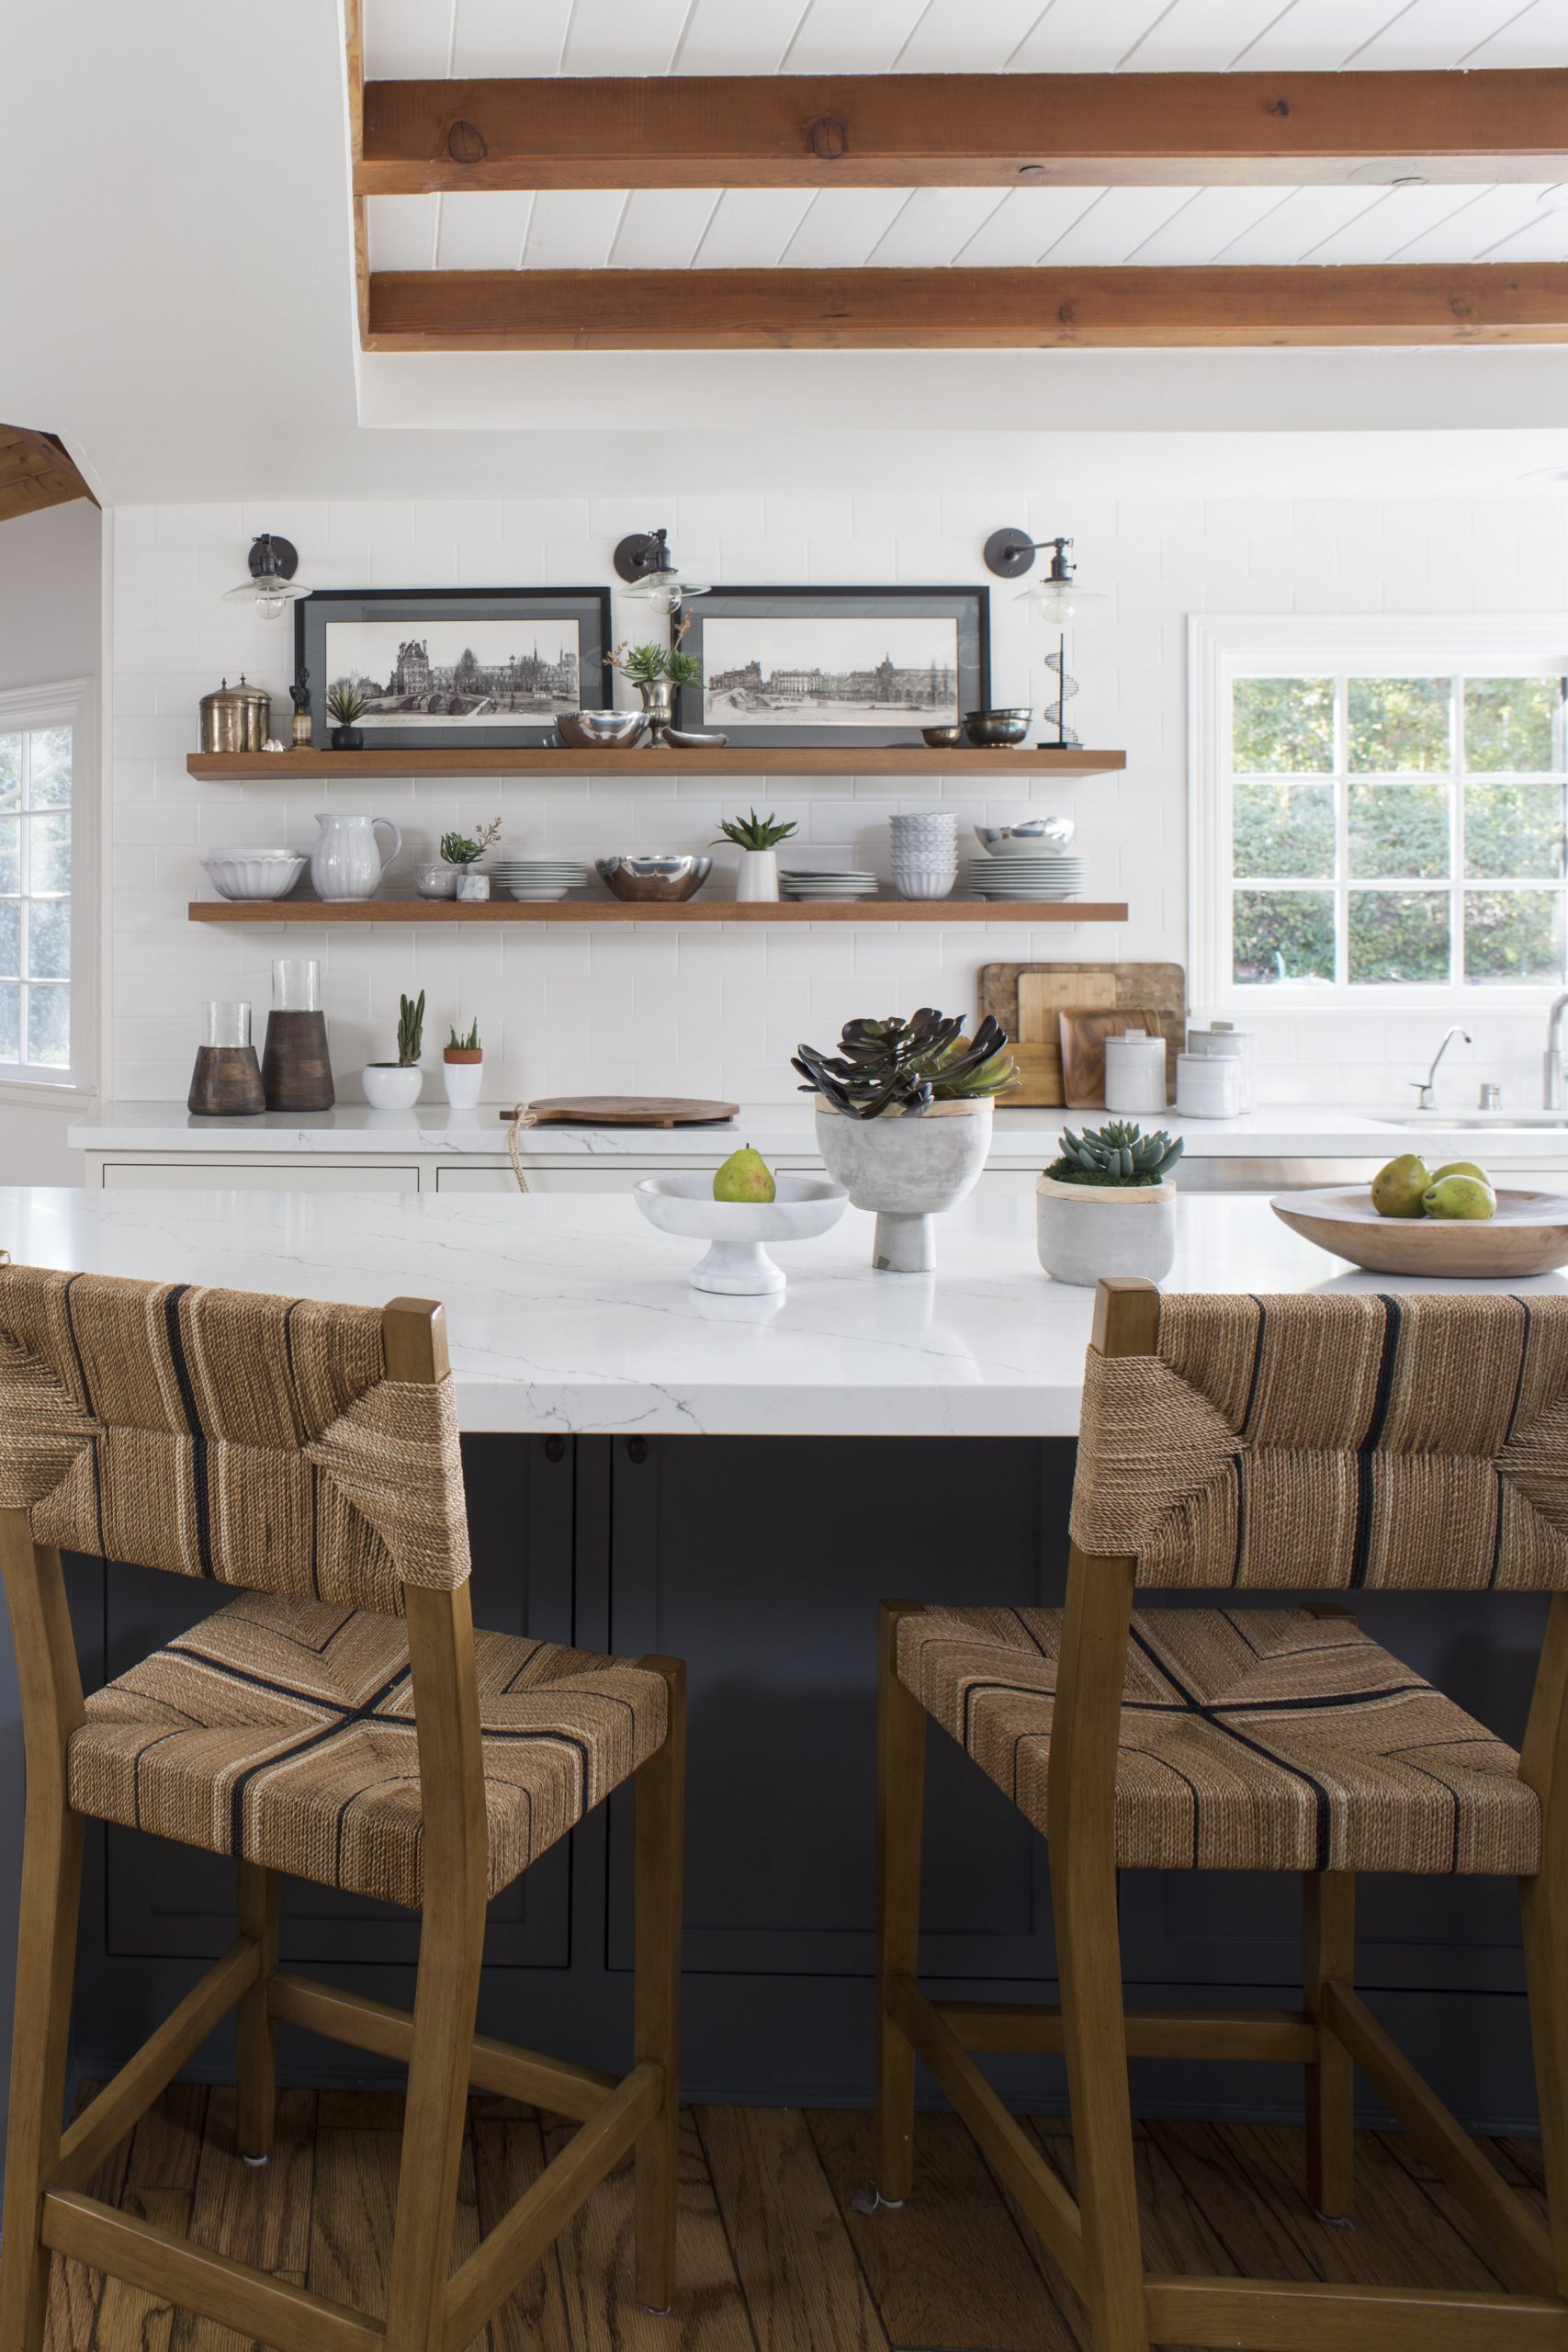 Island table with chairs in the kitchen